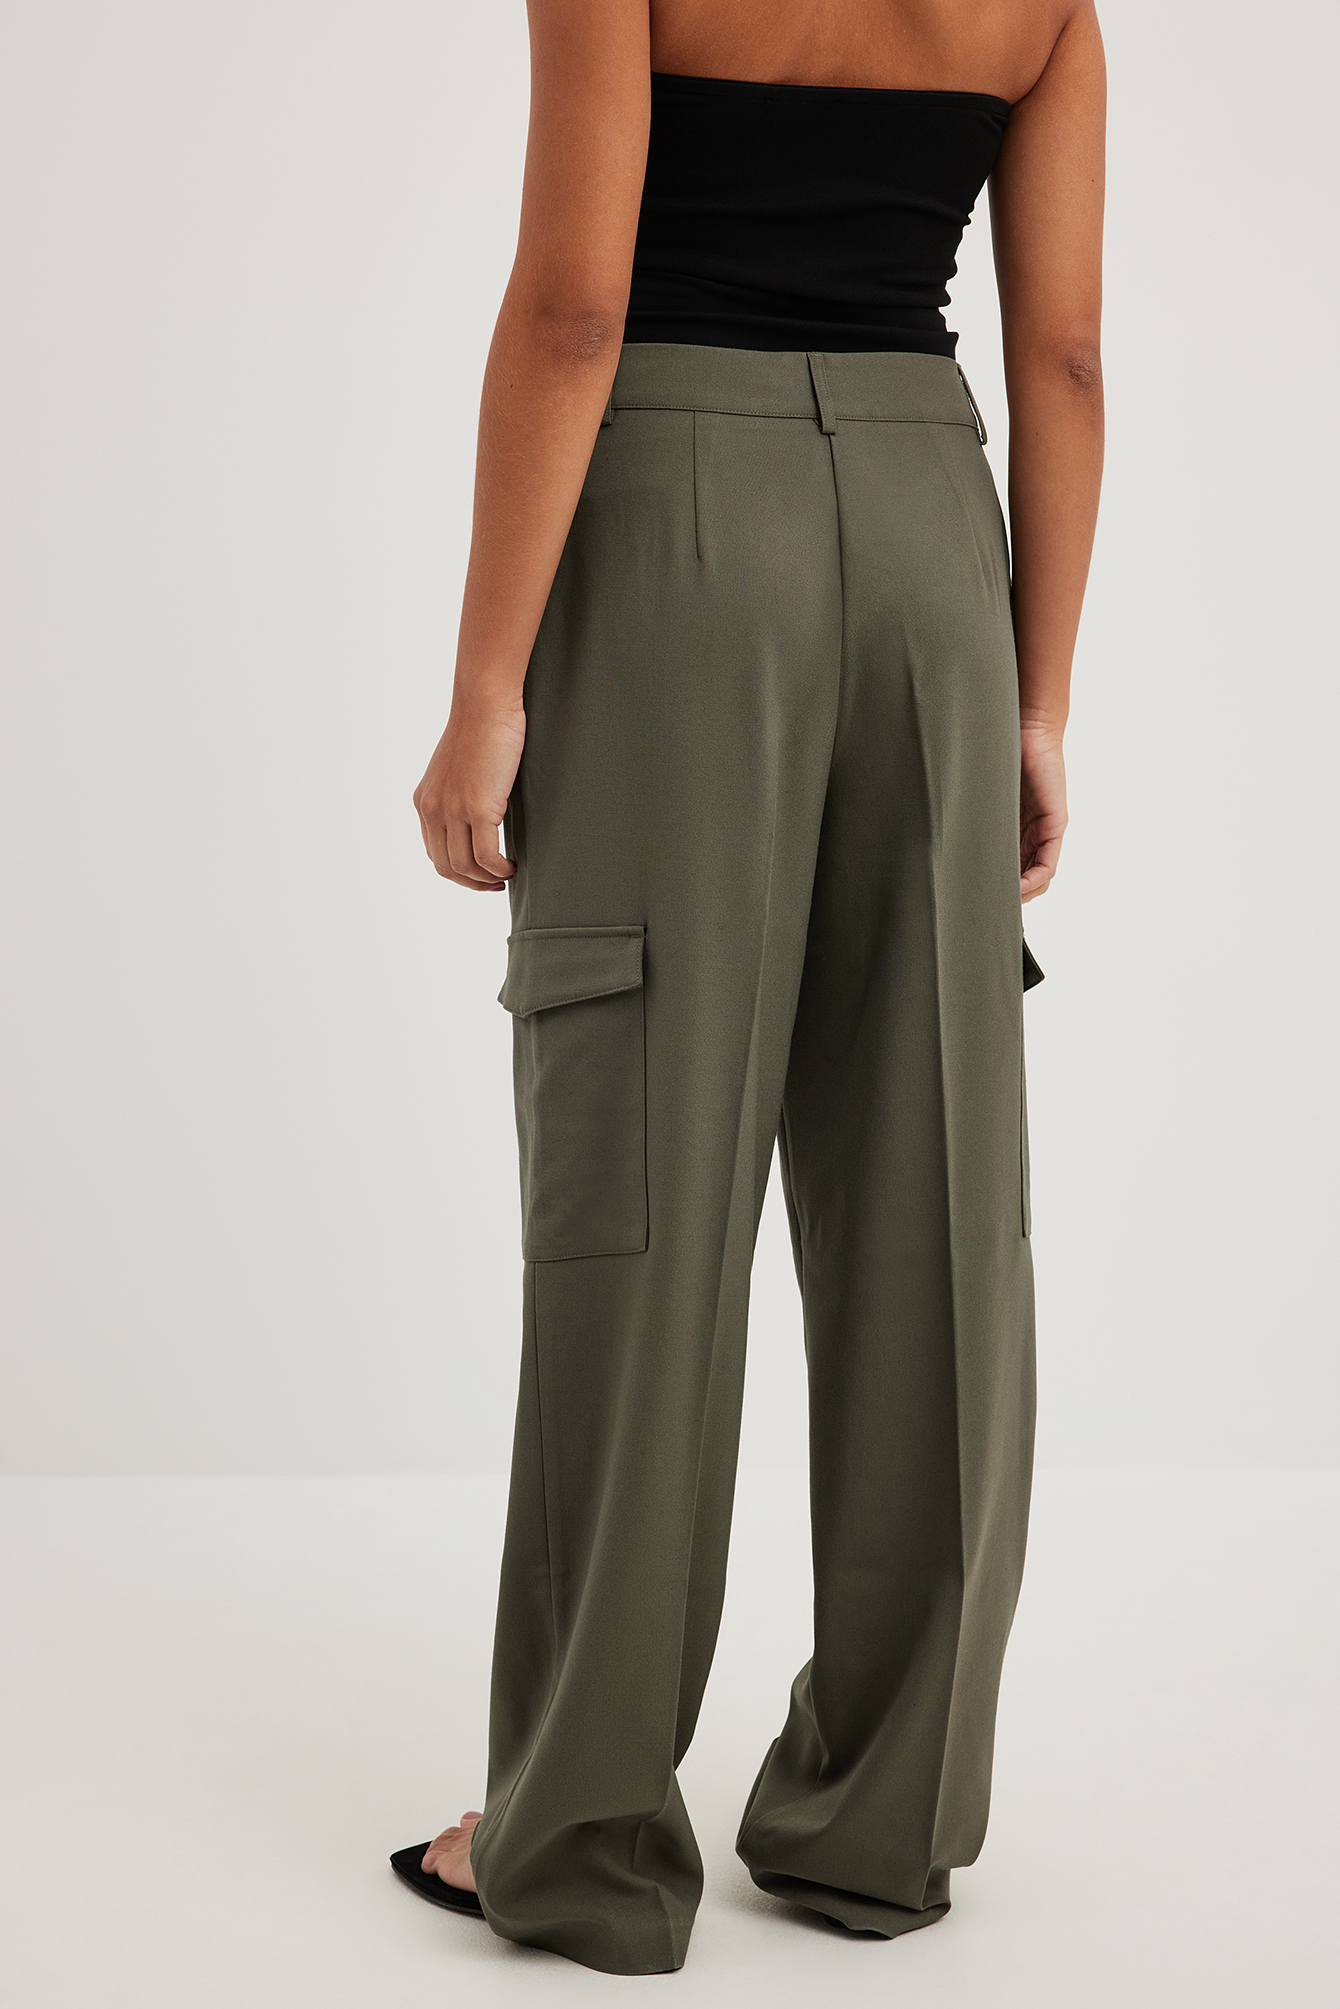 Versatile Army Green Cargo Pants For Women High Waist, Slim Fit,  Fashionable Capris Womens Cuffed Cargo Trousers For Spring/Summer 2023 From  Yong1984, $30.24